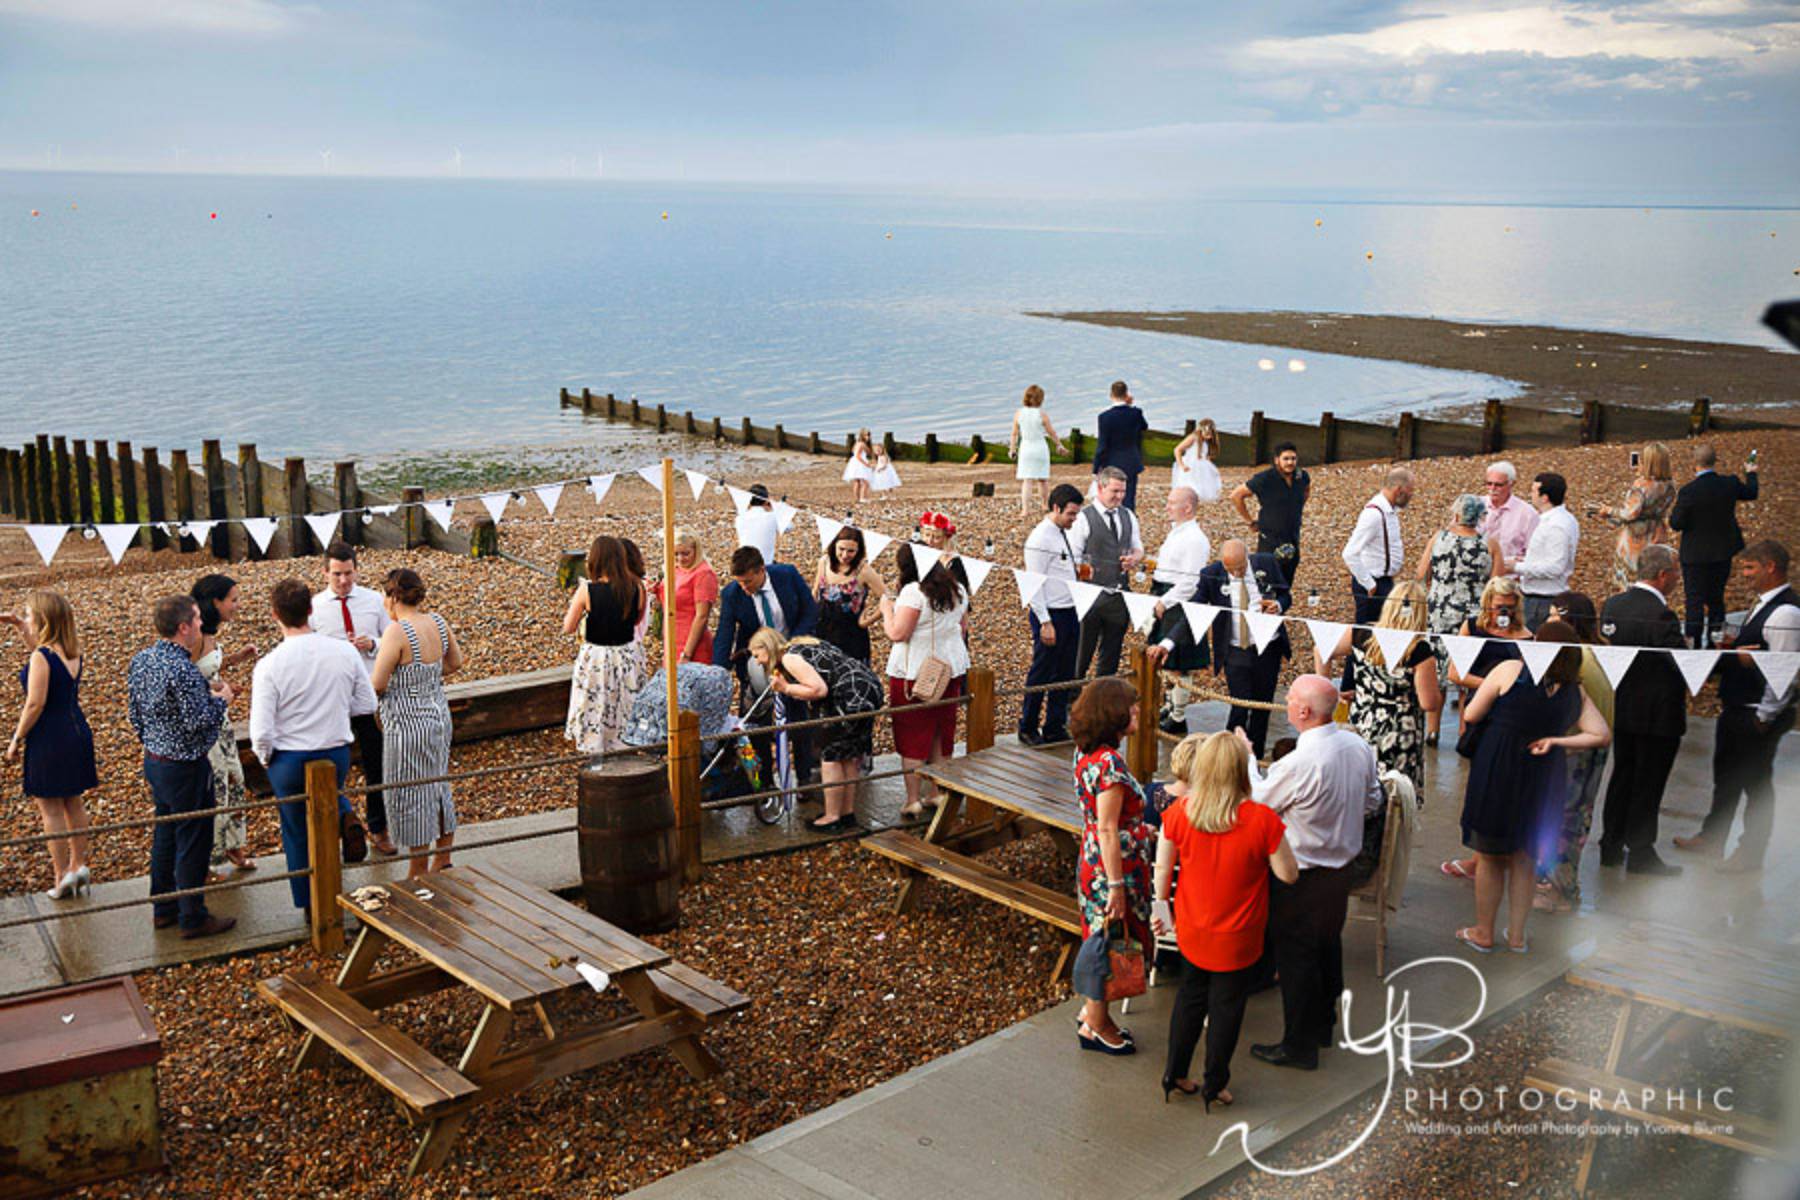 Wedding Photography at the East Quay Venue in Whitstable by YBPHOTOGRAPHIC